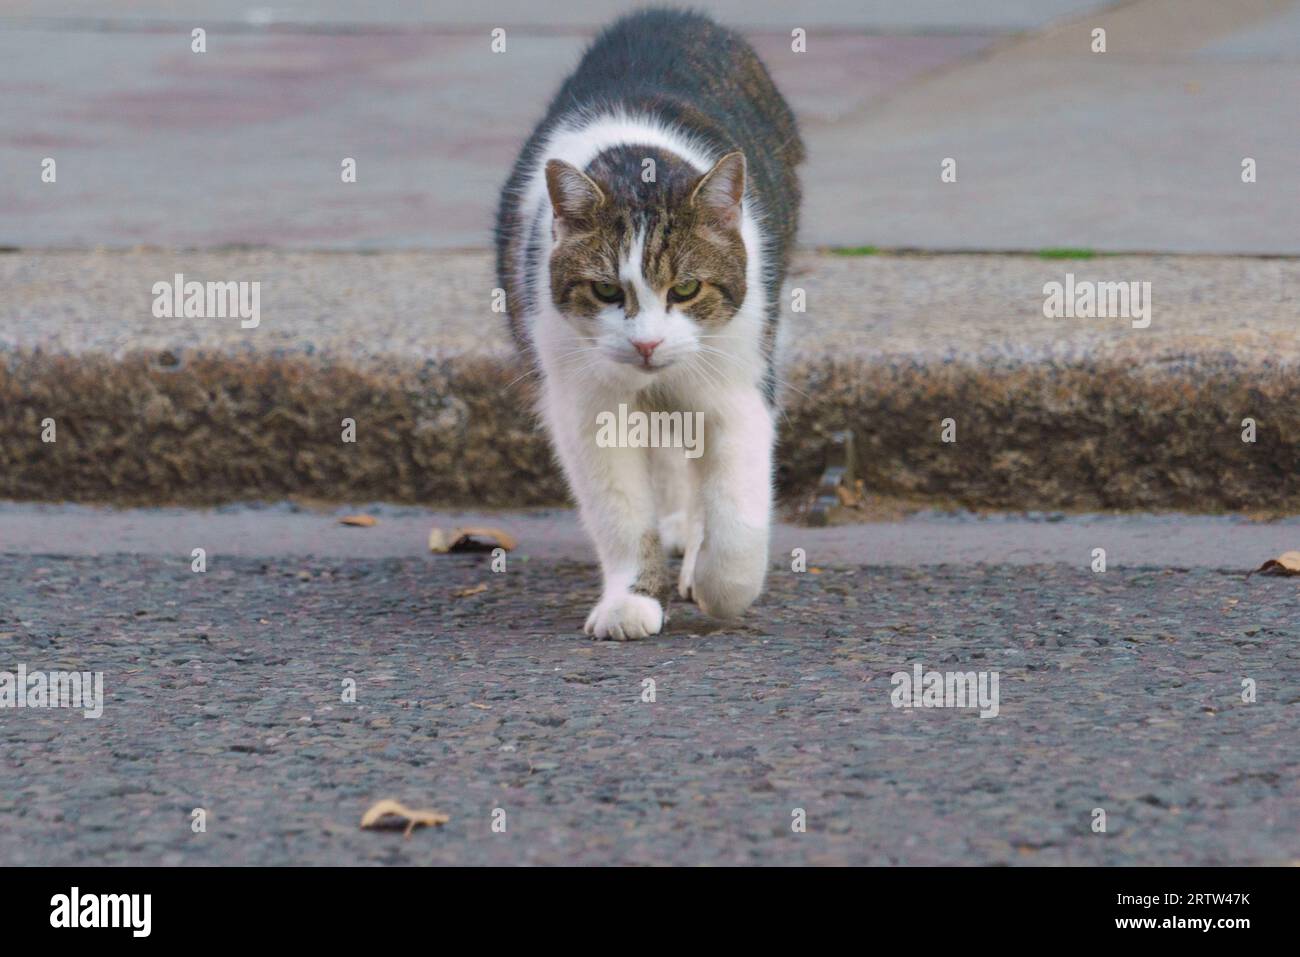 Larry the Cat and Chief Mouser to Downing Street, London, UK, poses for photos, and makes his way across the street. Stock Photo